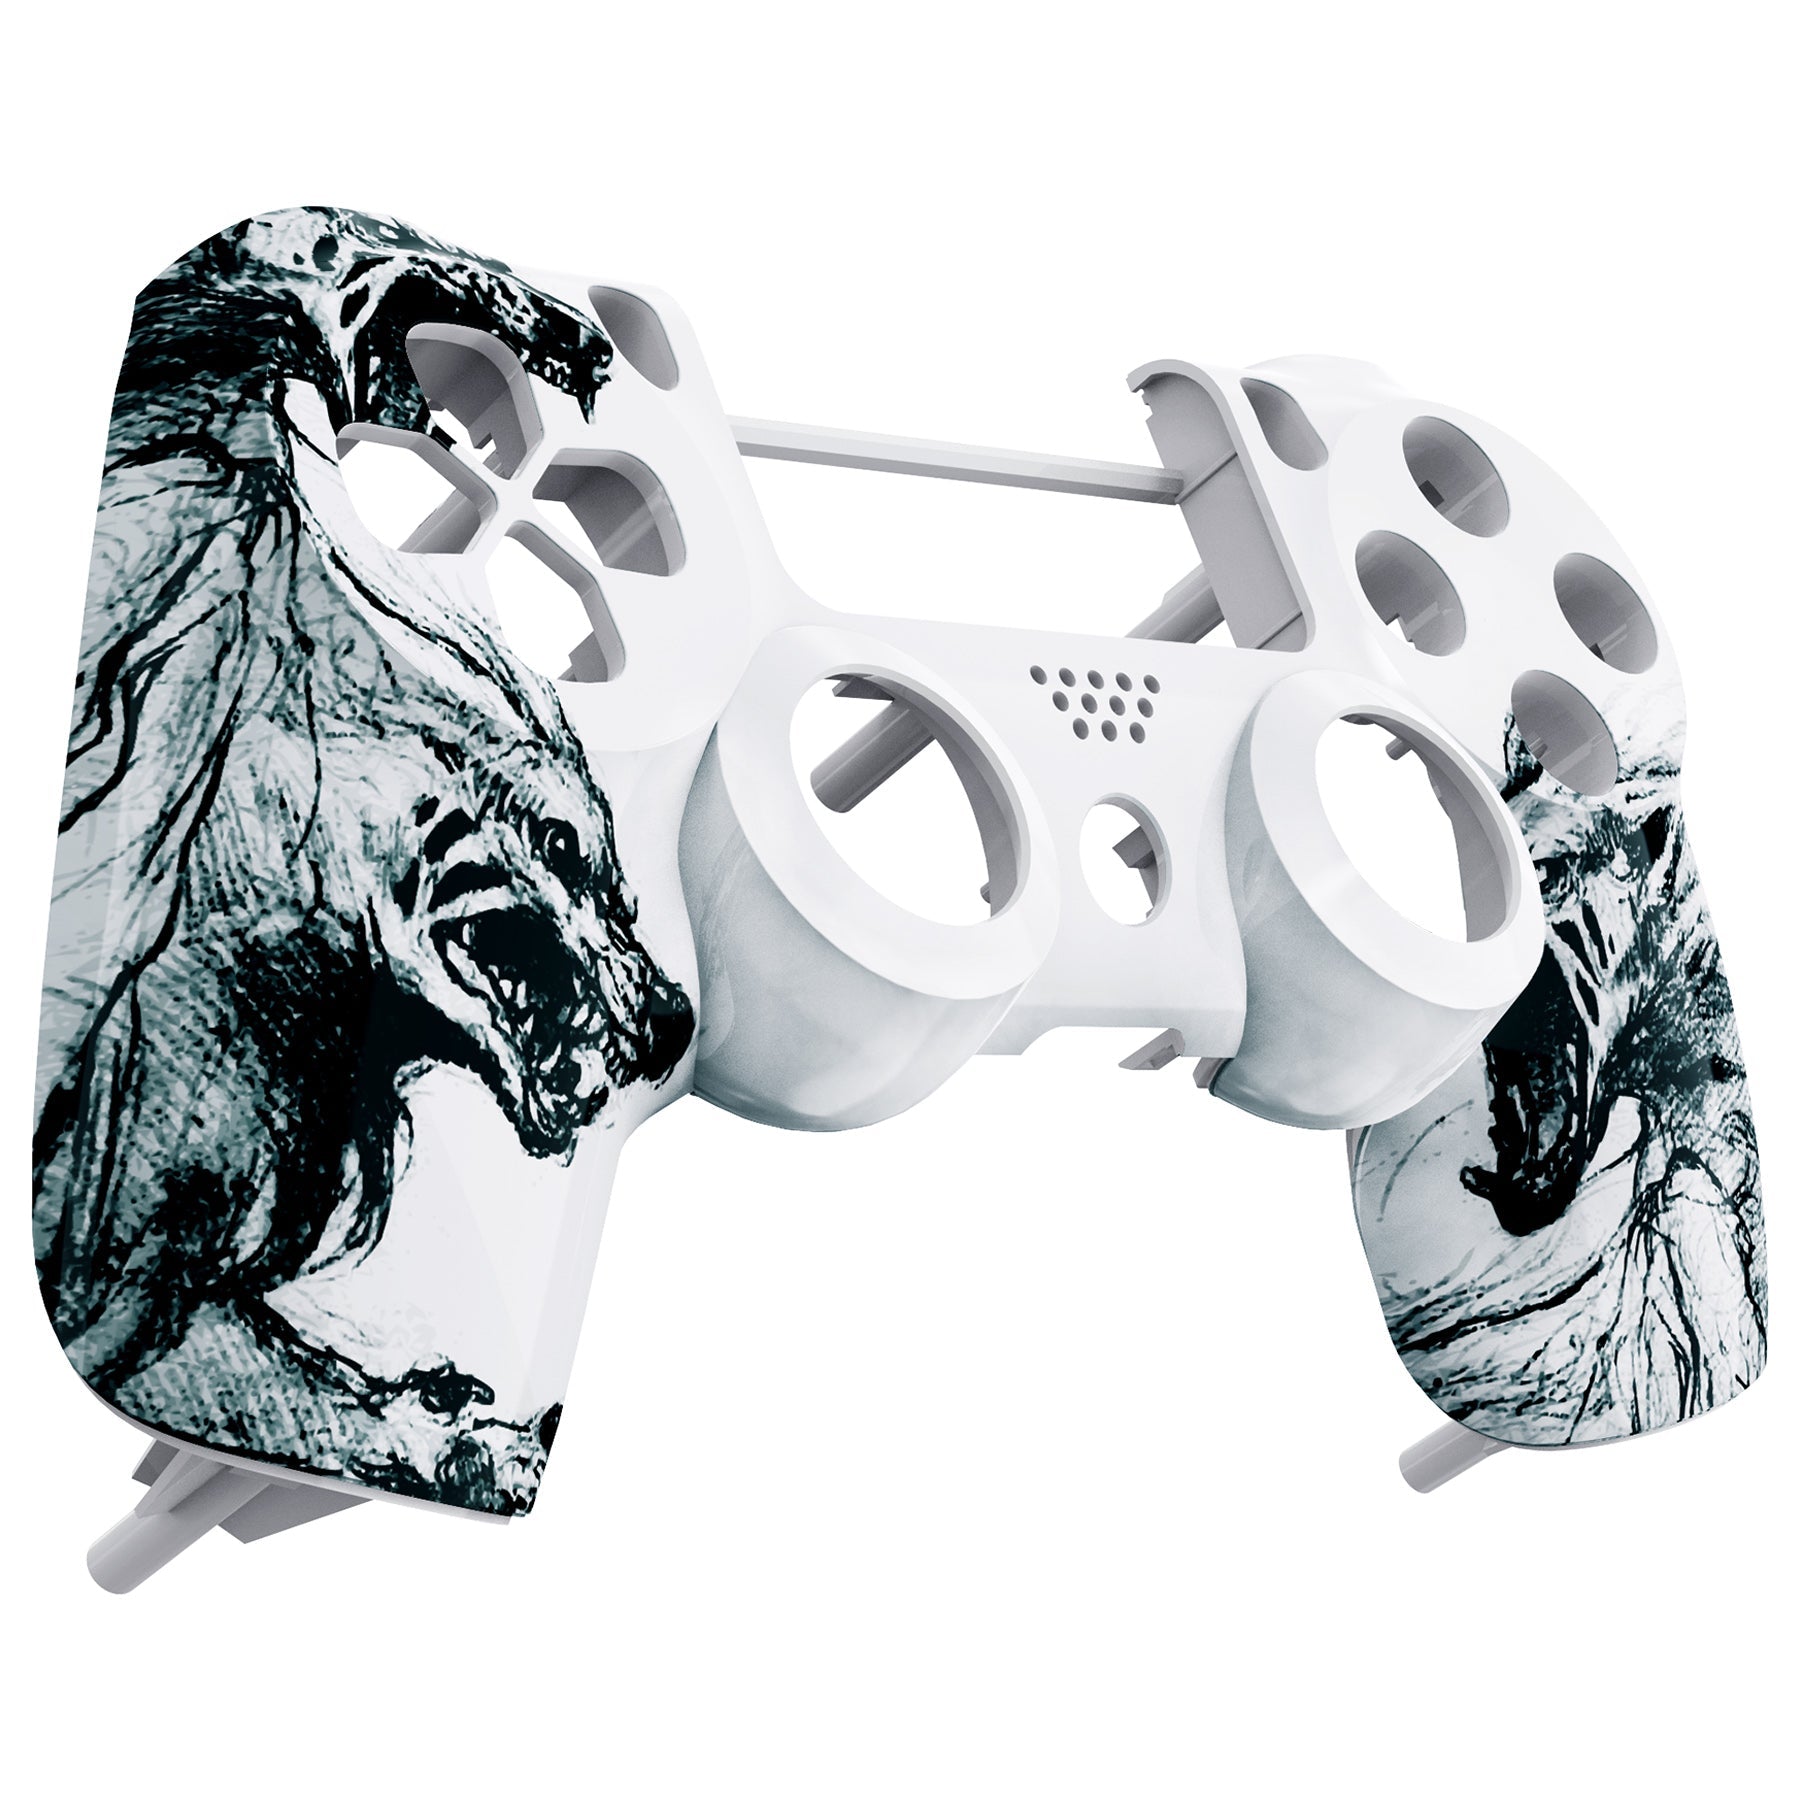 Customized Wolf Soul Front Shell for ps4 Pro Slim Controller (CUH-ZCT2  JDM-040 JDM-050 JDM-055) - SP4FT09